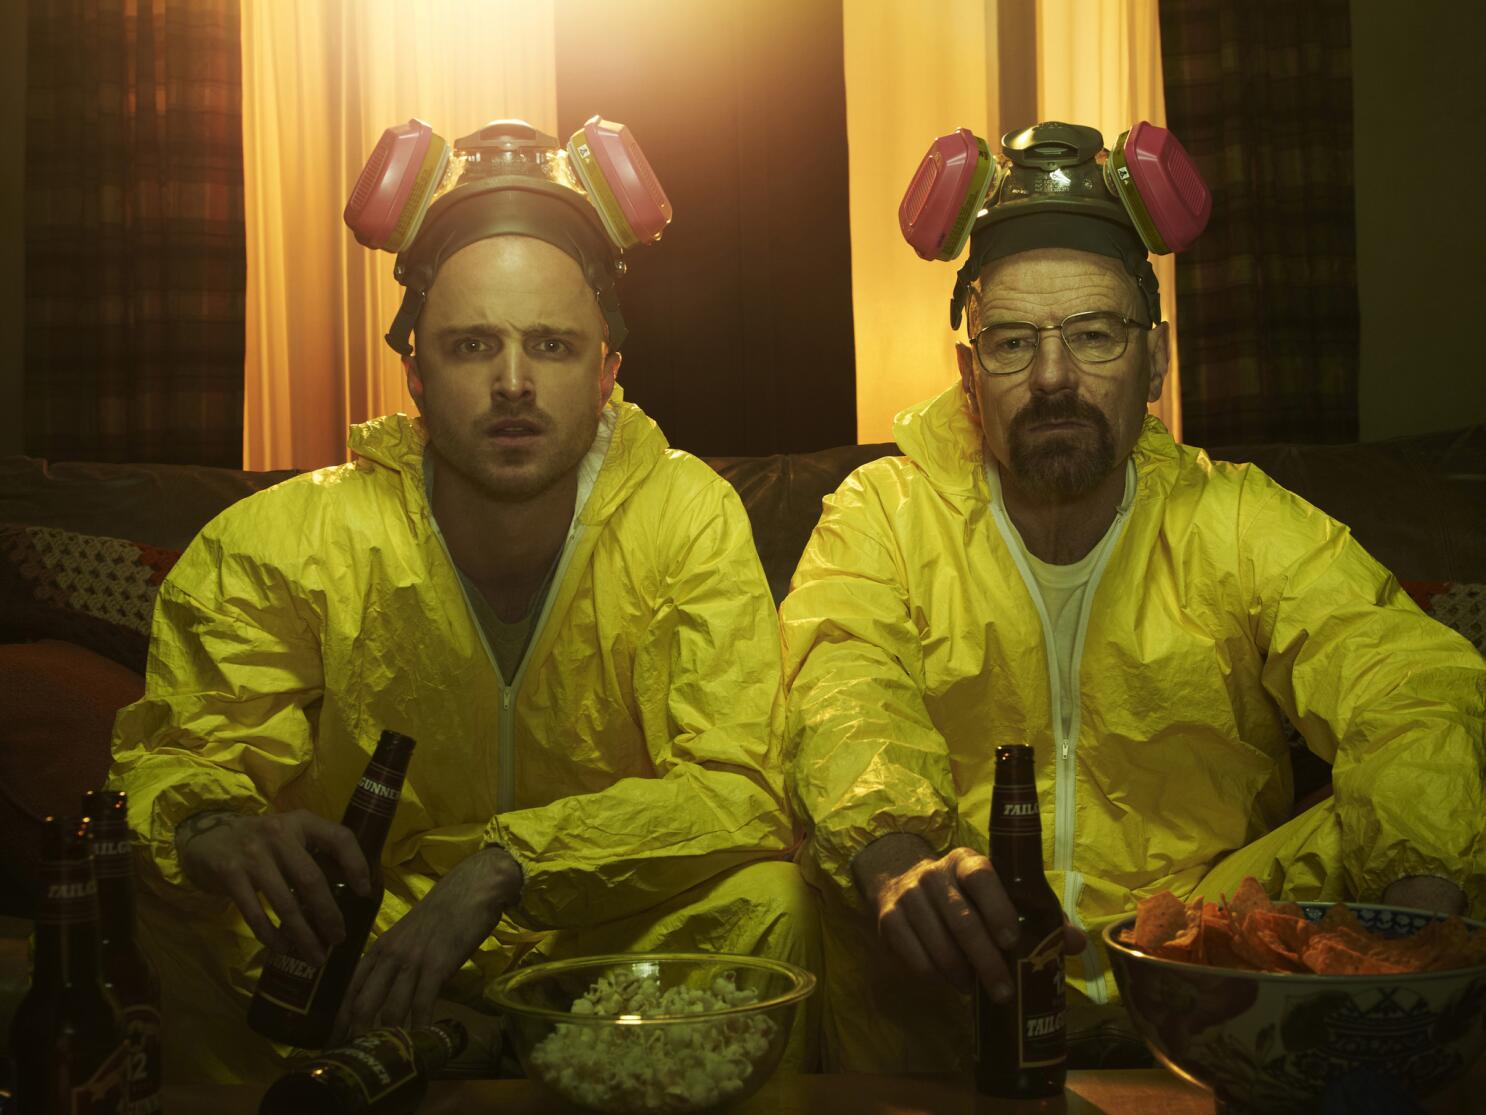 We Are the Champions: It's Like Breaking Bad with Chilis